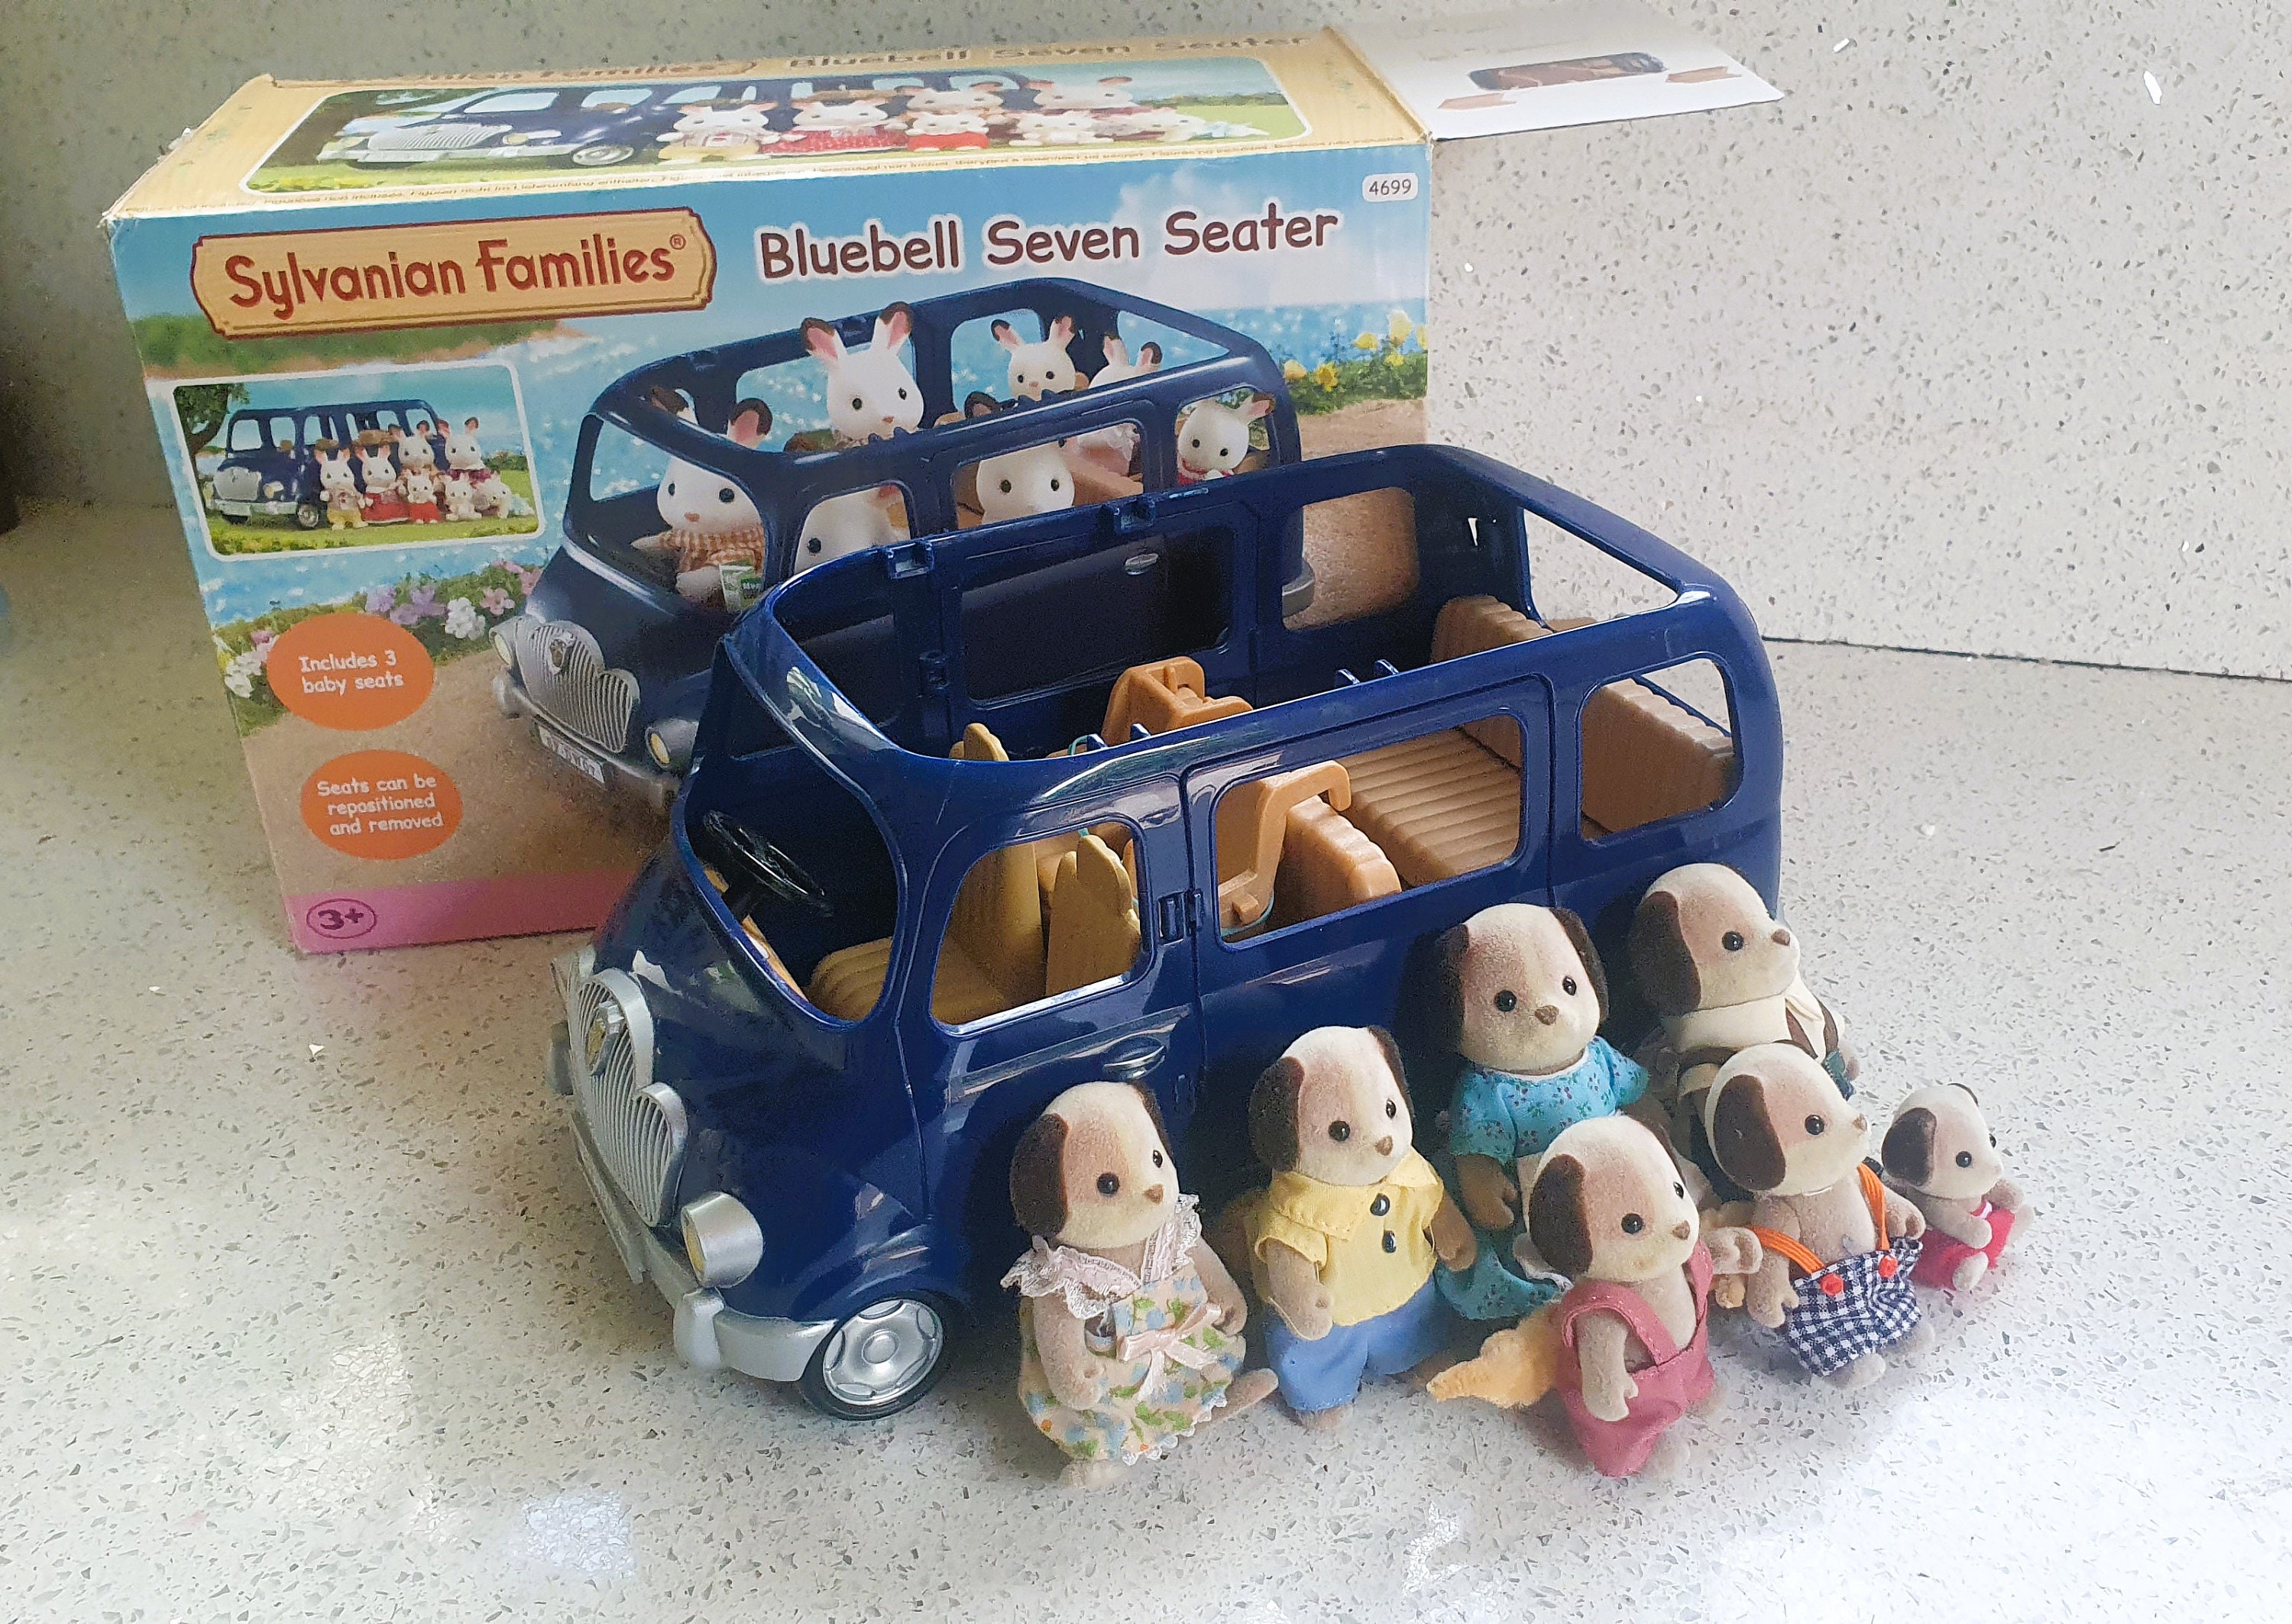 Vintage Sylvanian Families Beagle Dog Family and 7 Seater Blue Car